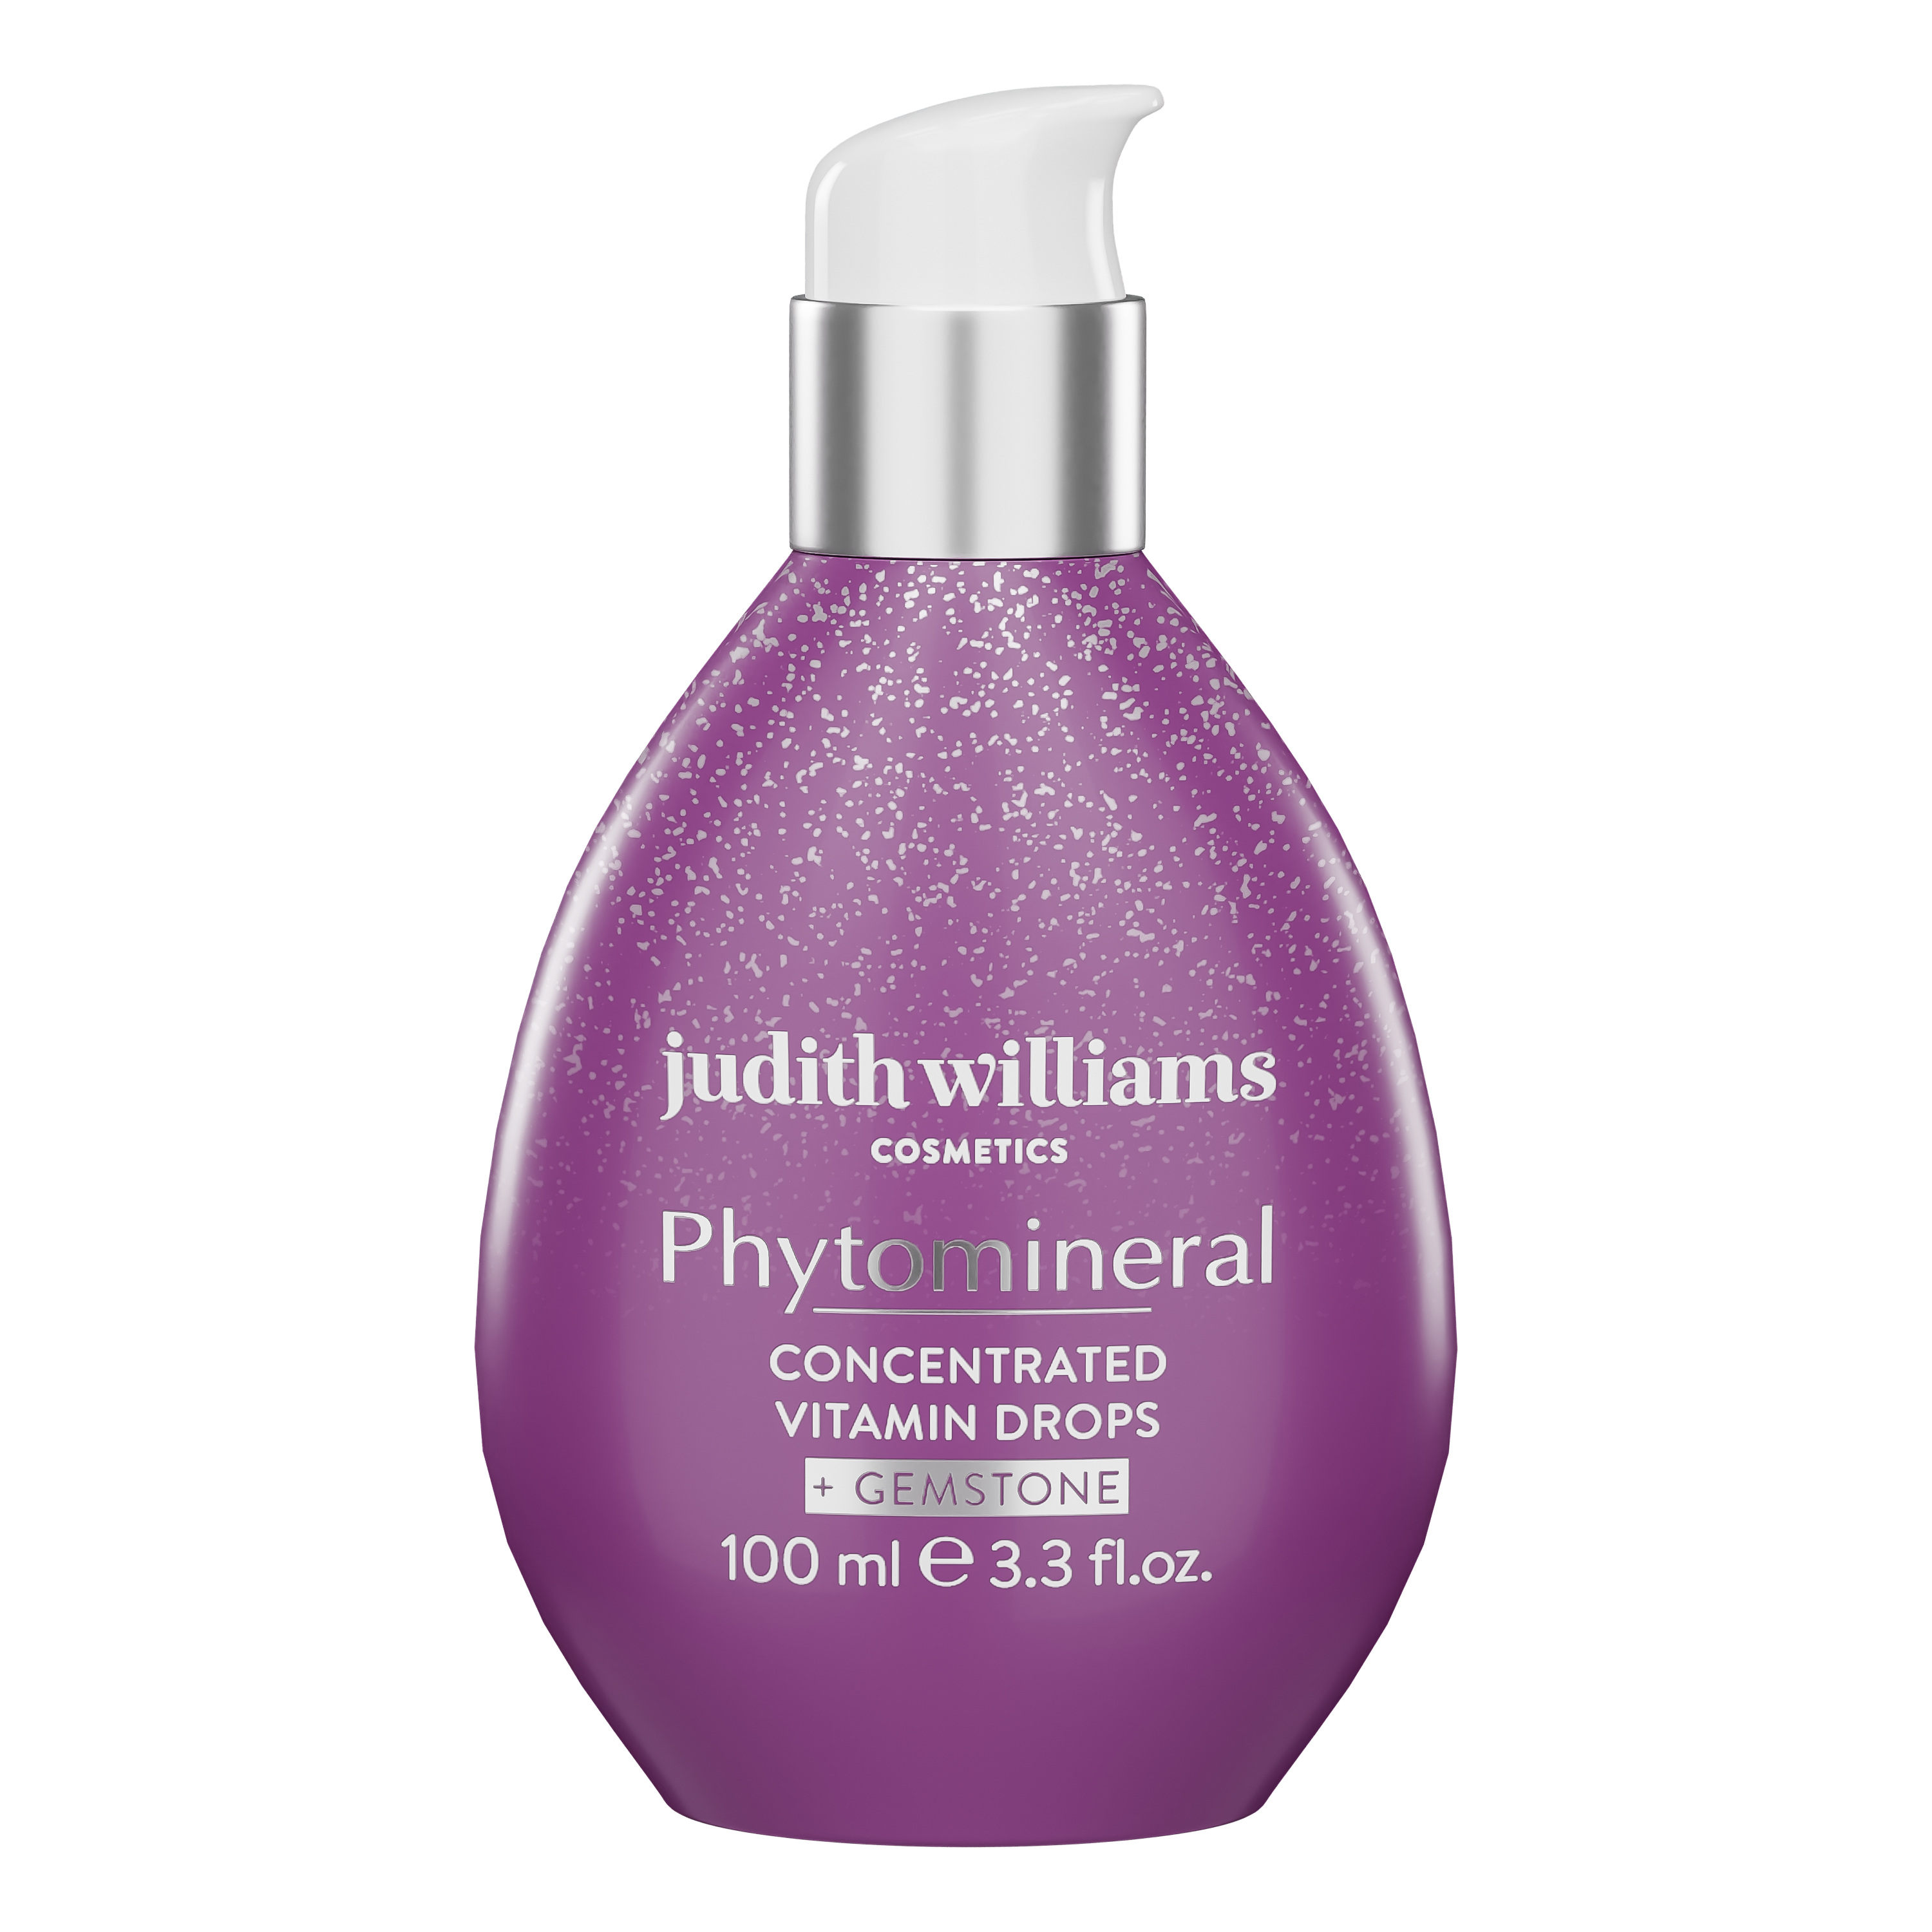 Gesichtskonzentrat | Phytomineral | Concentrated Vitamin Drops + Gemstone | Judith Williams